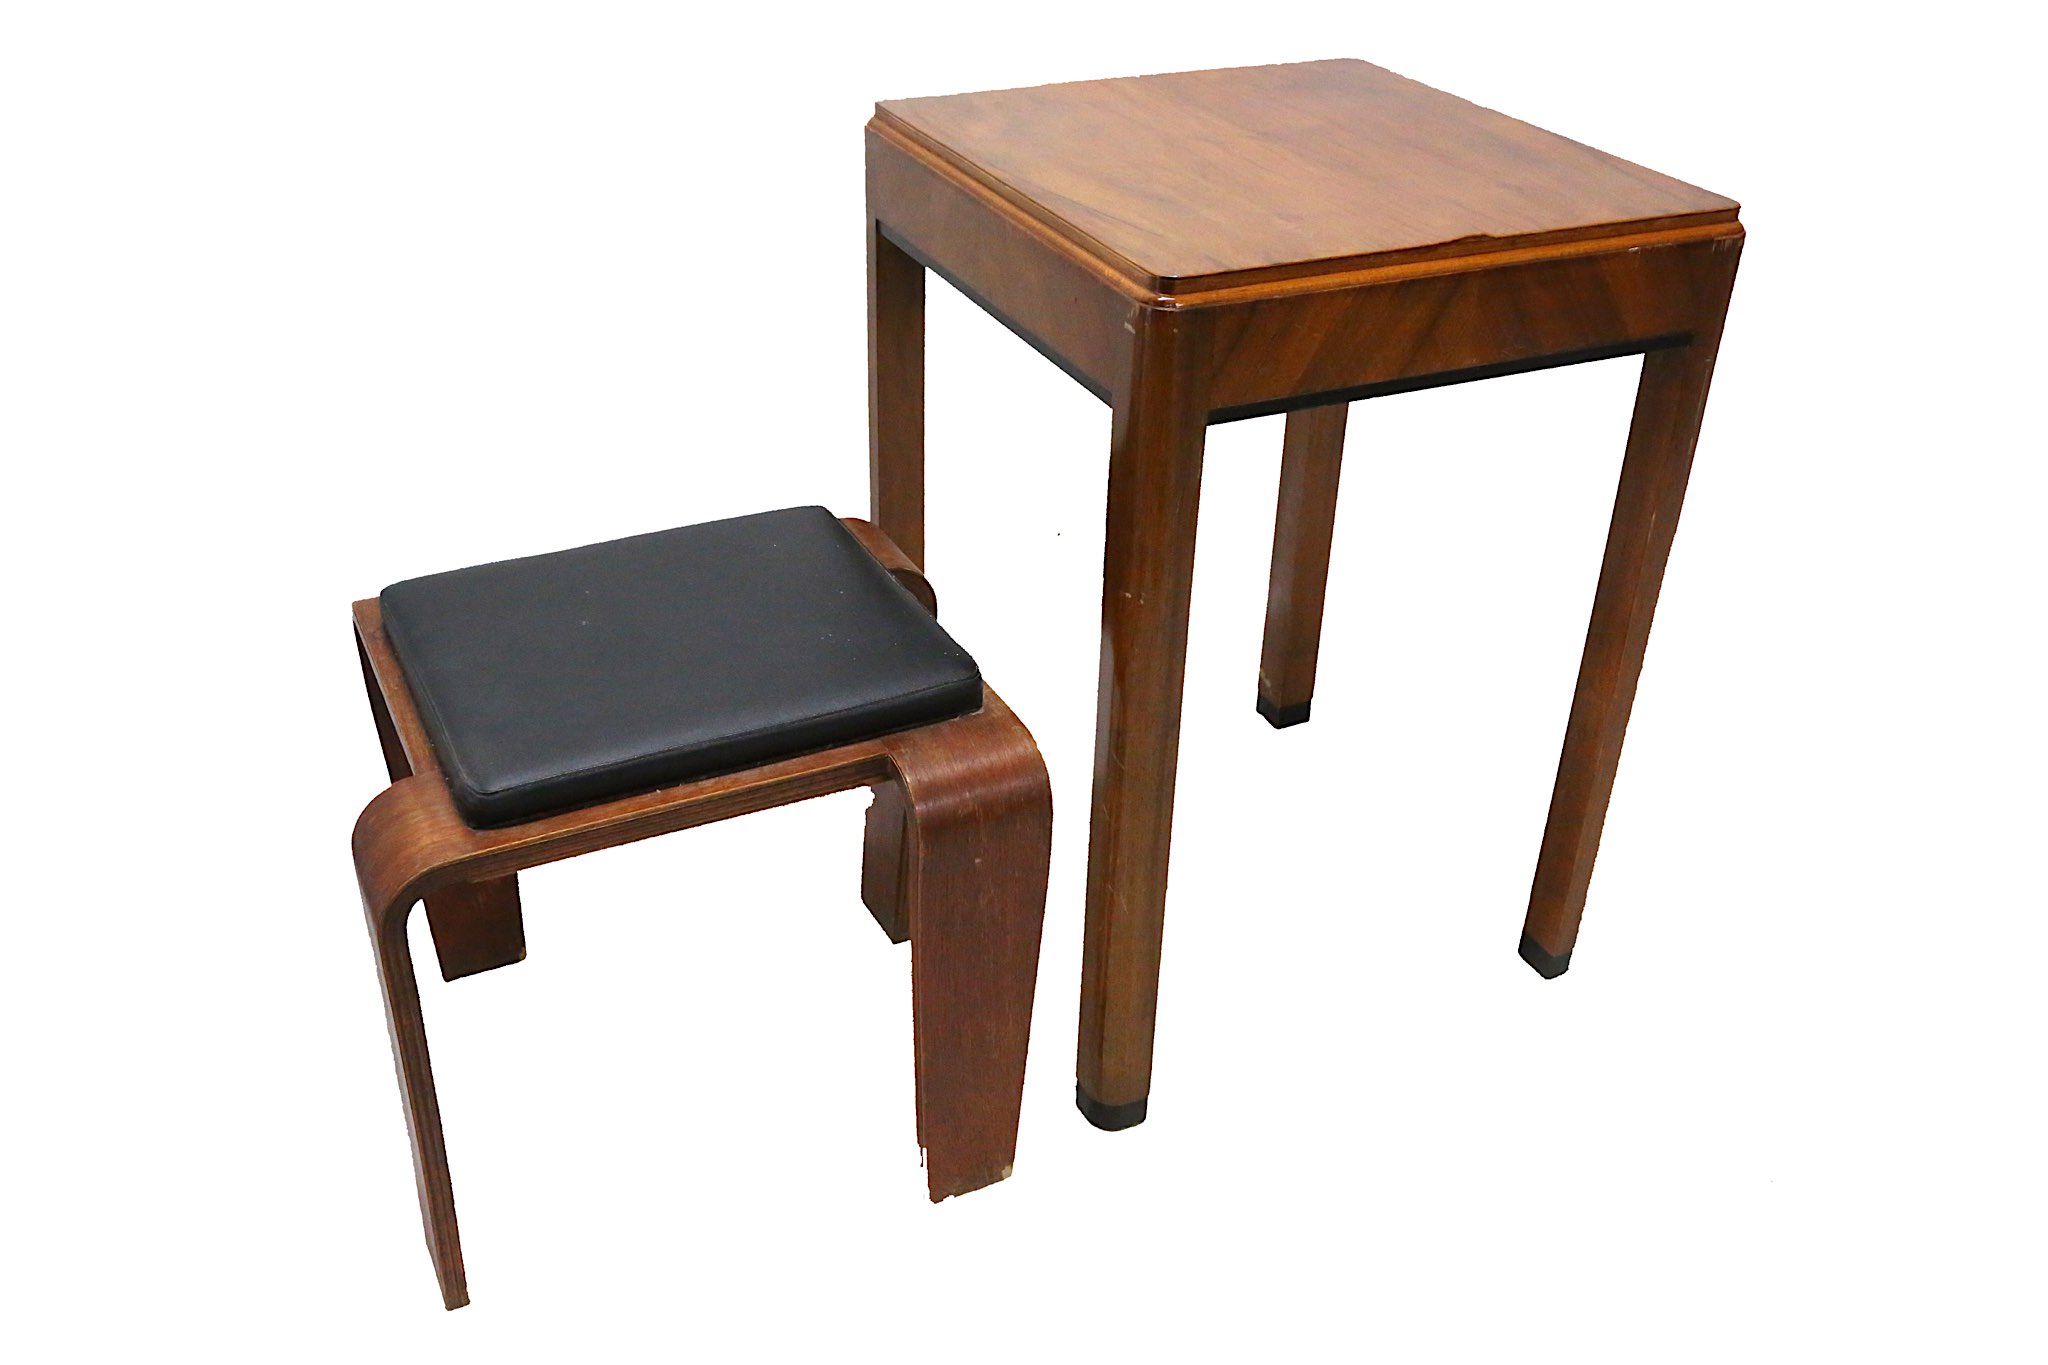 An Art Deco style walnut occaisional table, mid-20th century; together with a later bentwood stool